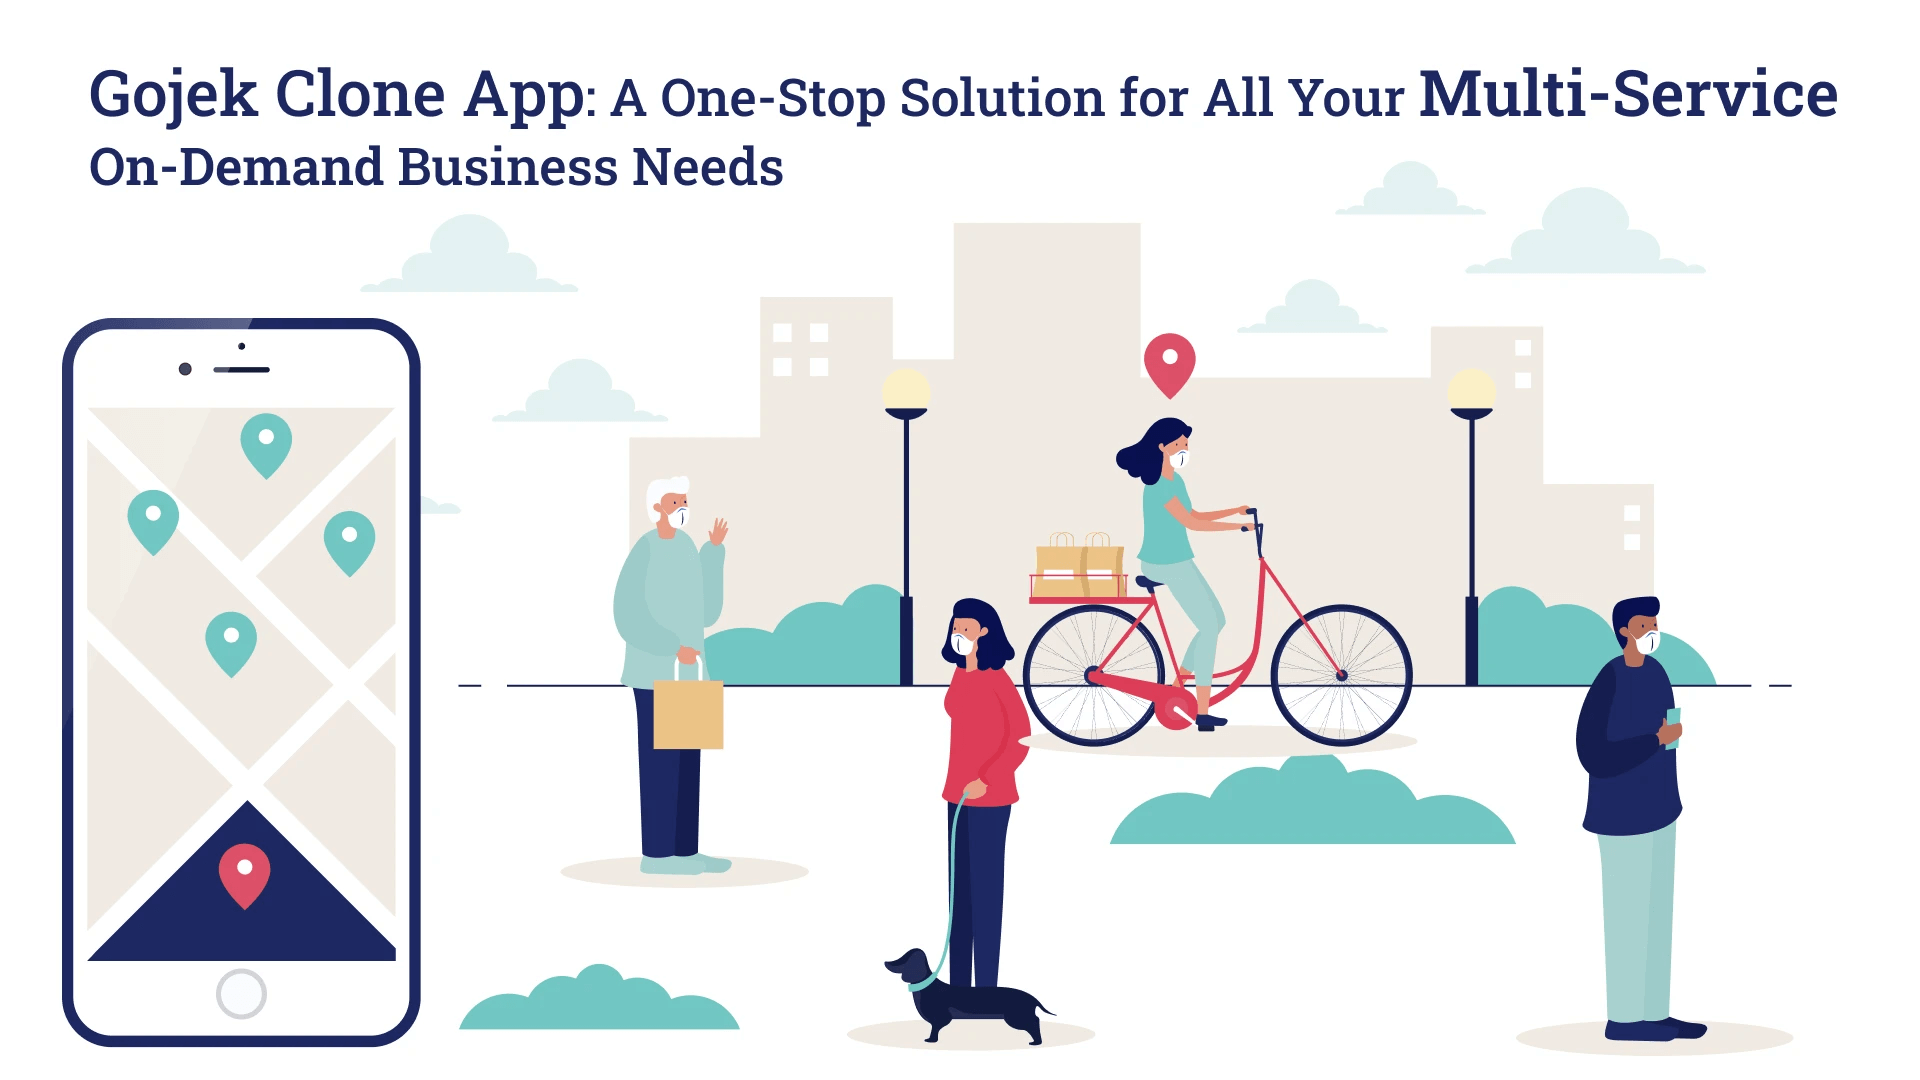 Gojek Clone App A One-Stop Solution for All Your Multi-Service On-Demand Business Needs